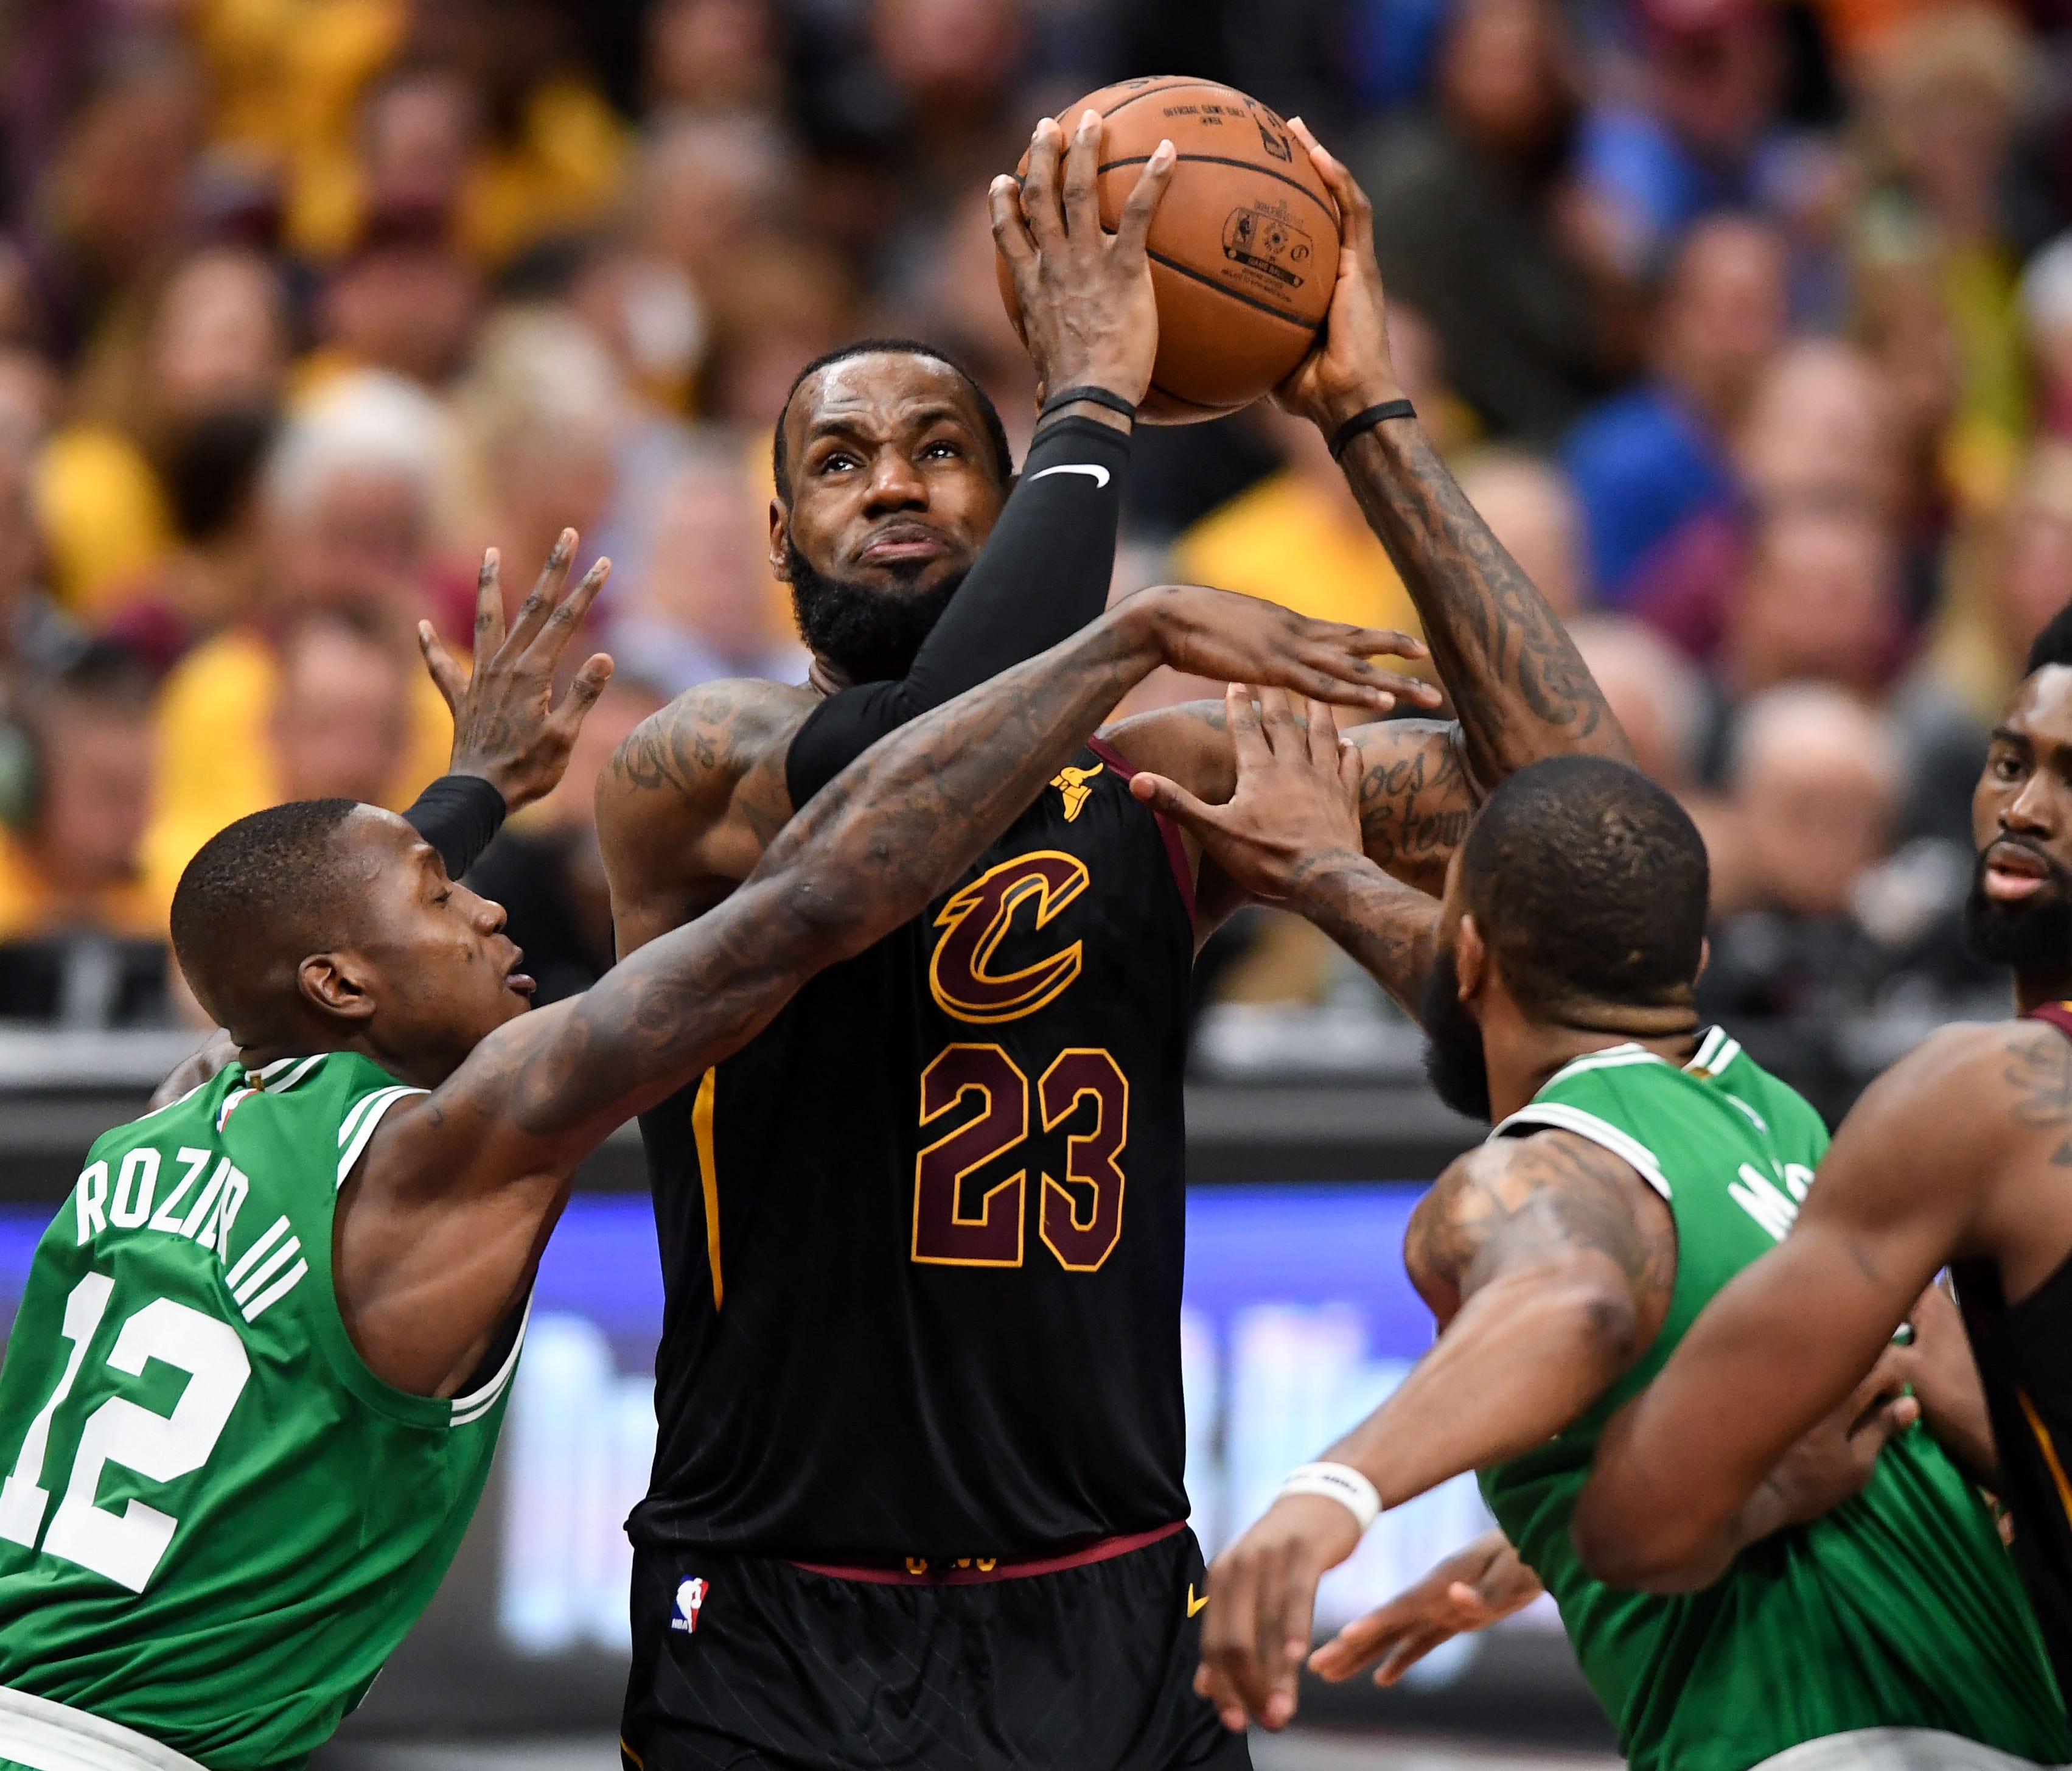 LeBron James notched his sixth 40-point game of these playoffs.